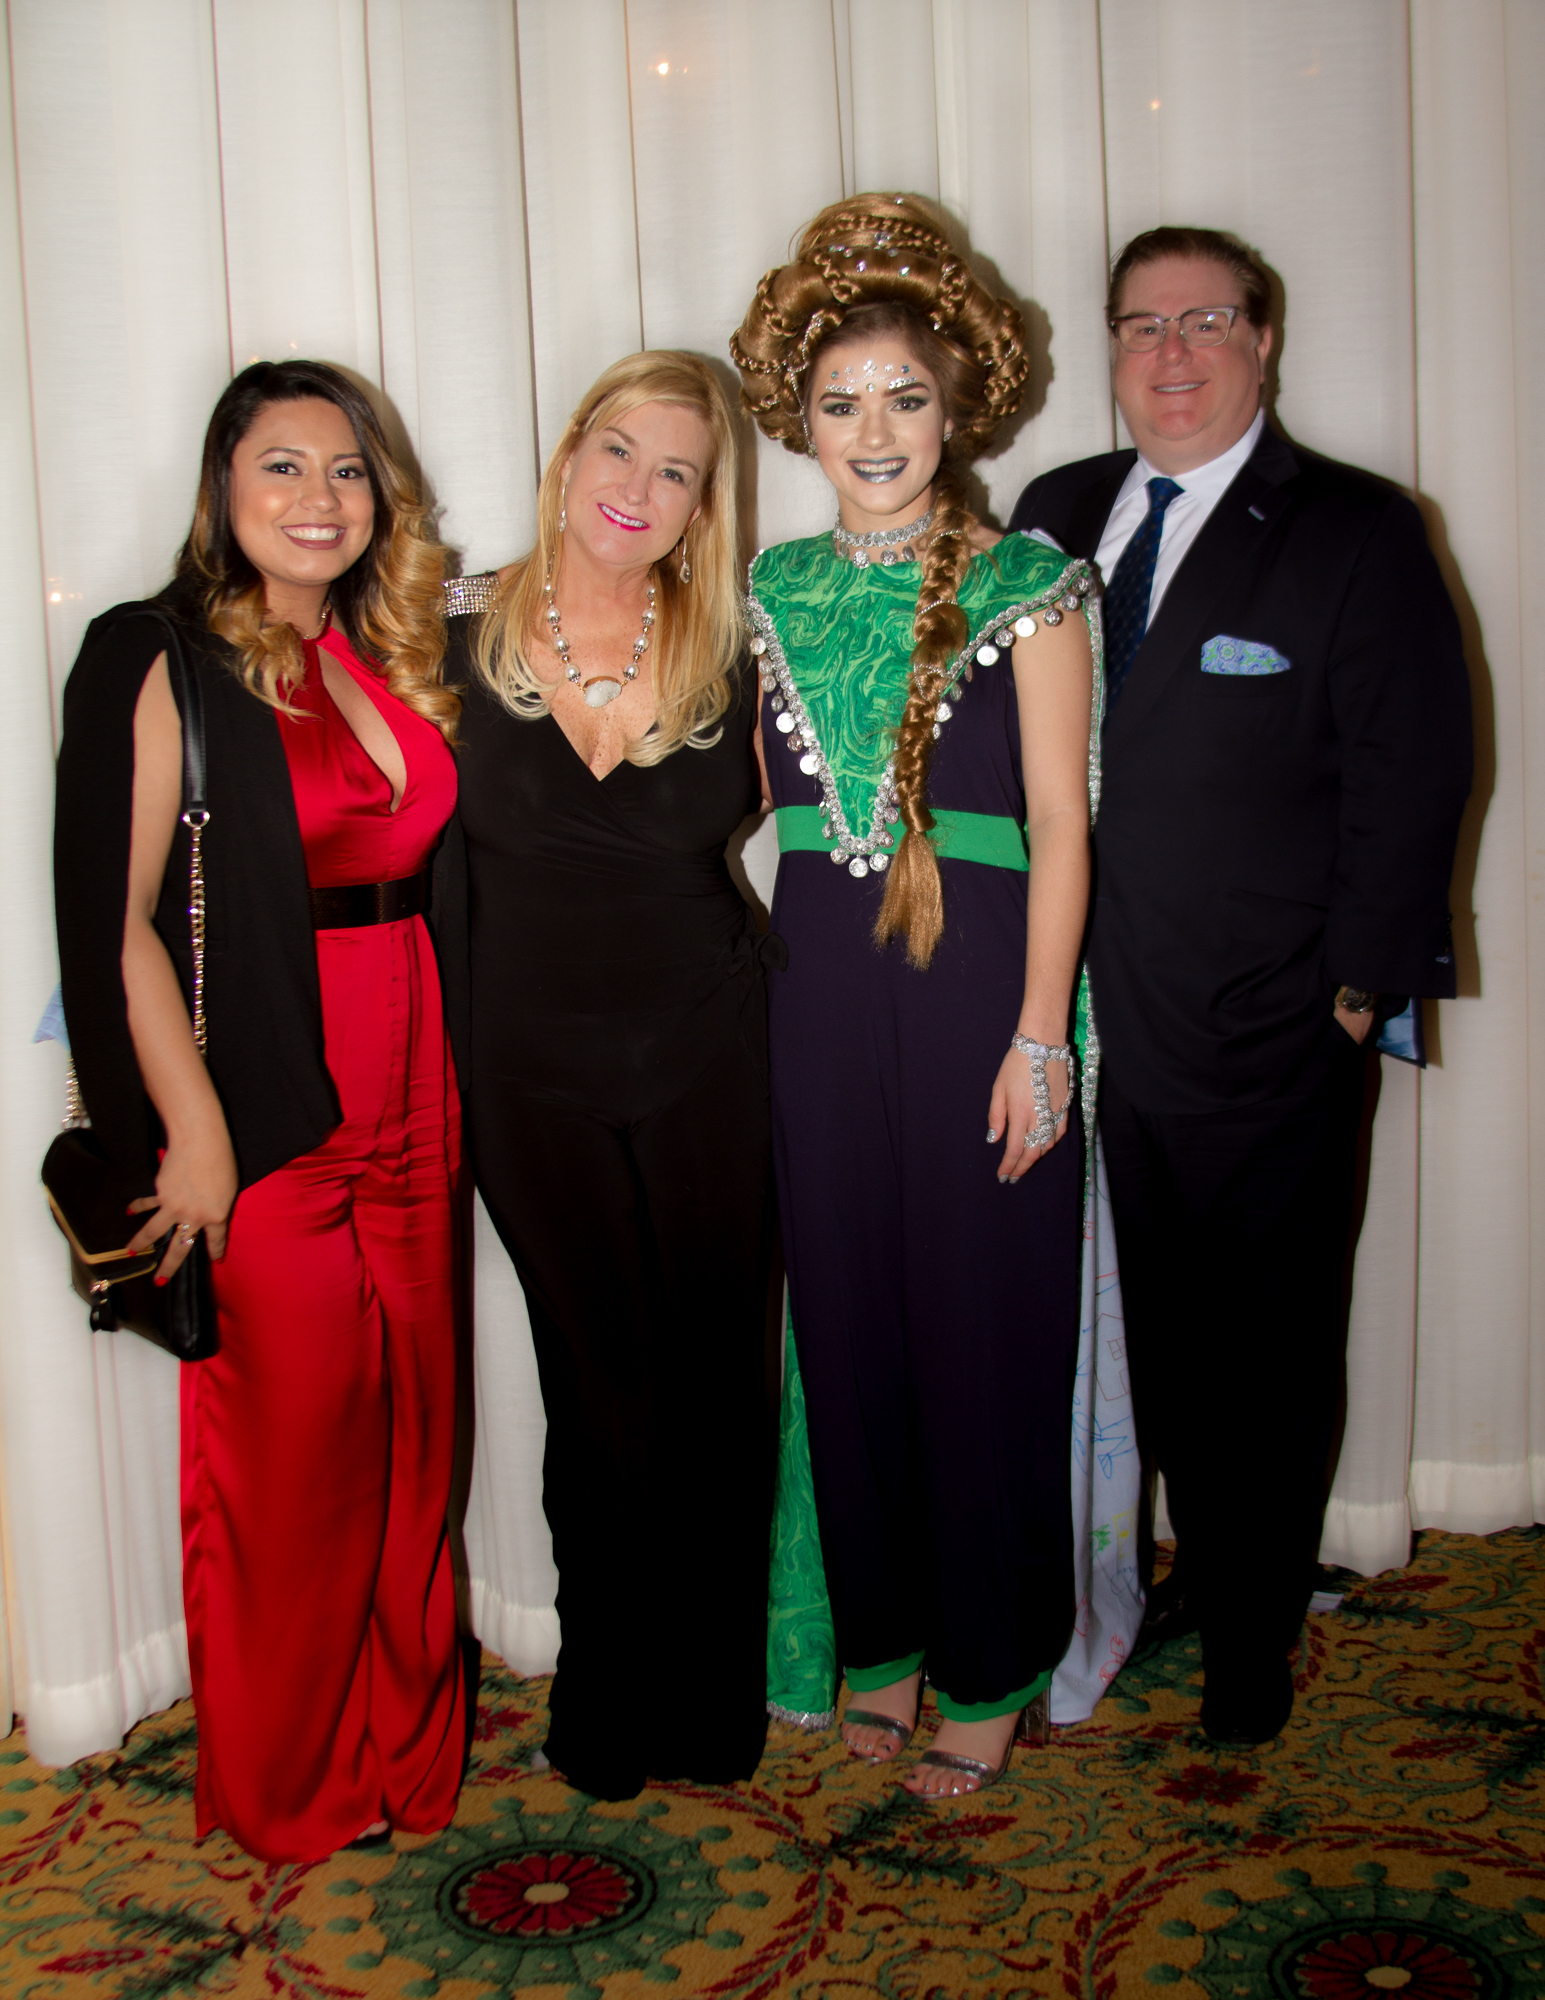 (from left to right) Executive Assistant to the AMG CEO Joselin Paz, AMG VP May Gayle Mengert, Model Virginia Billings and AMG CEO Paul Mengert.